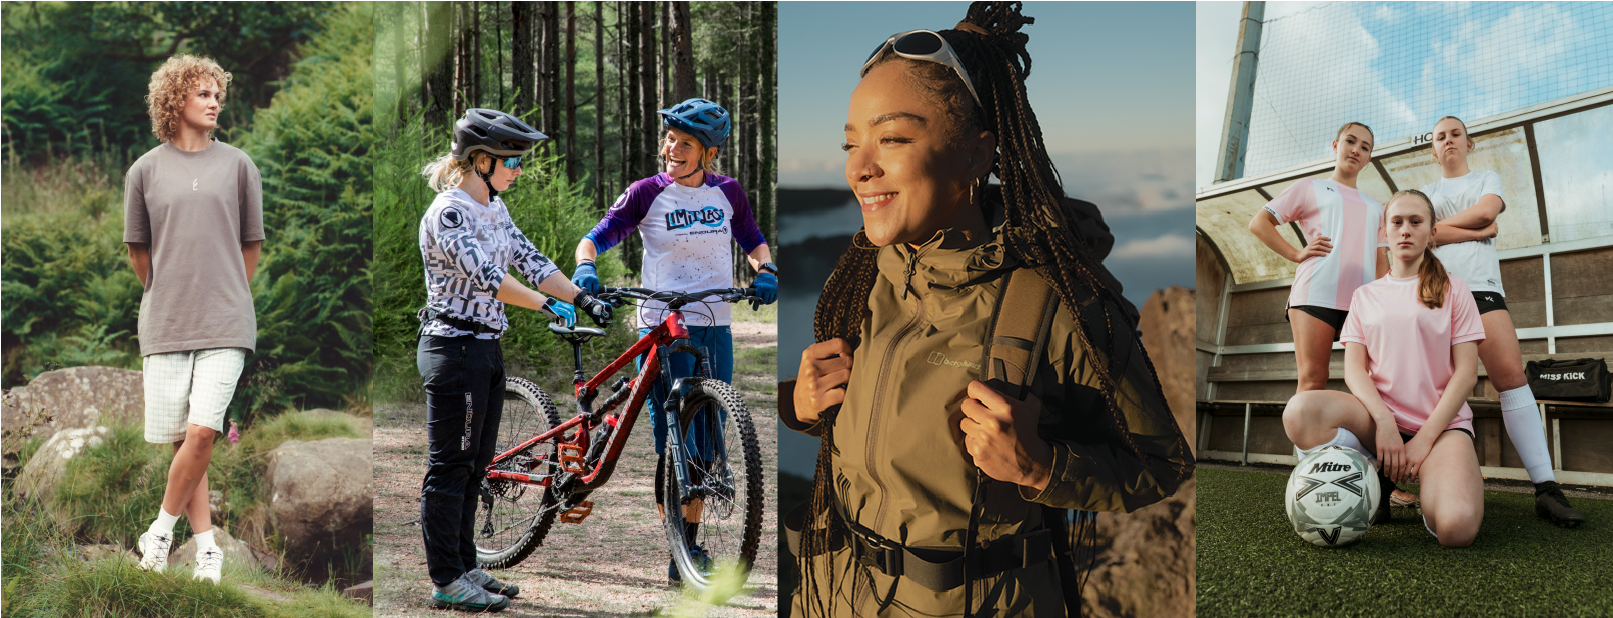 IWD: Our brands driving inclusion in sports and the outdoors